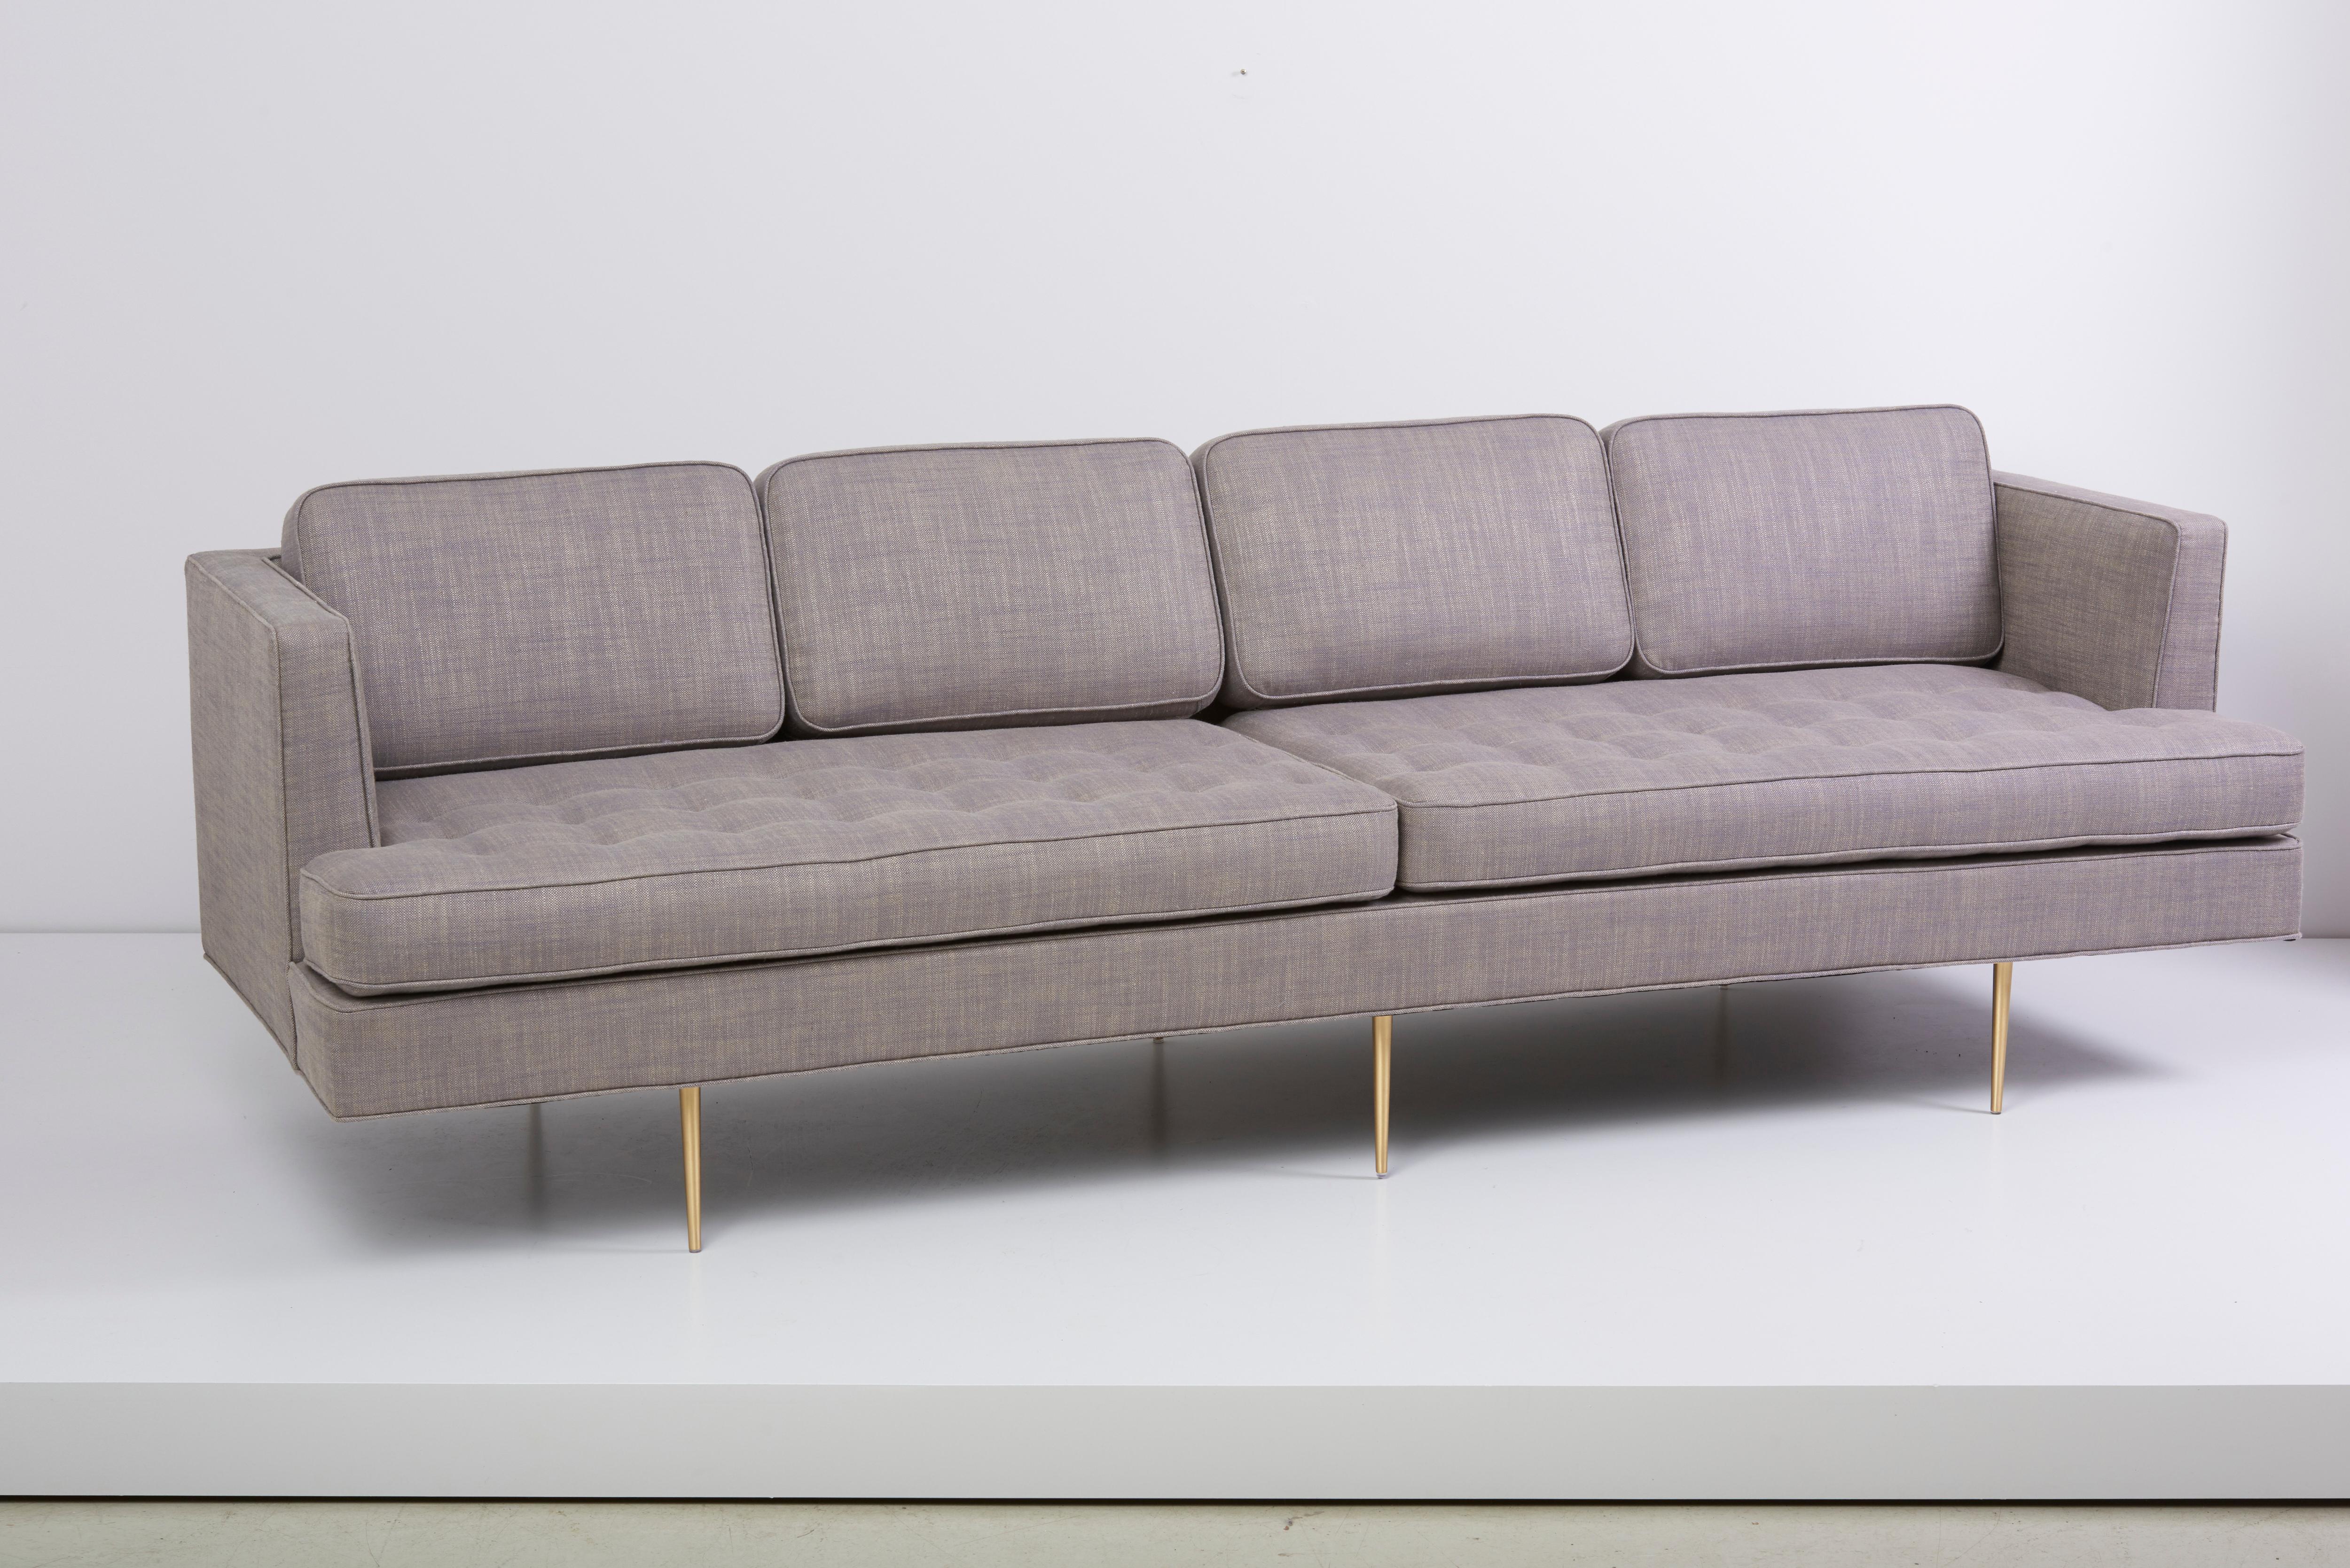 Mid-Century Modern Newly Upholstered Sofa 4906 with Lounge Chair by Edward Wormley for Dunbar, US